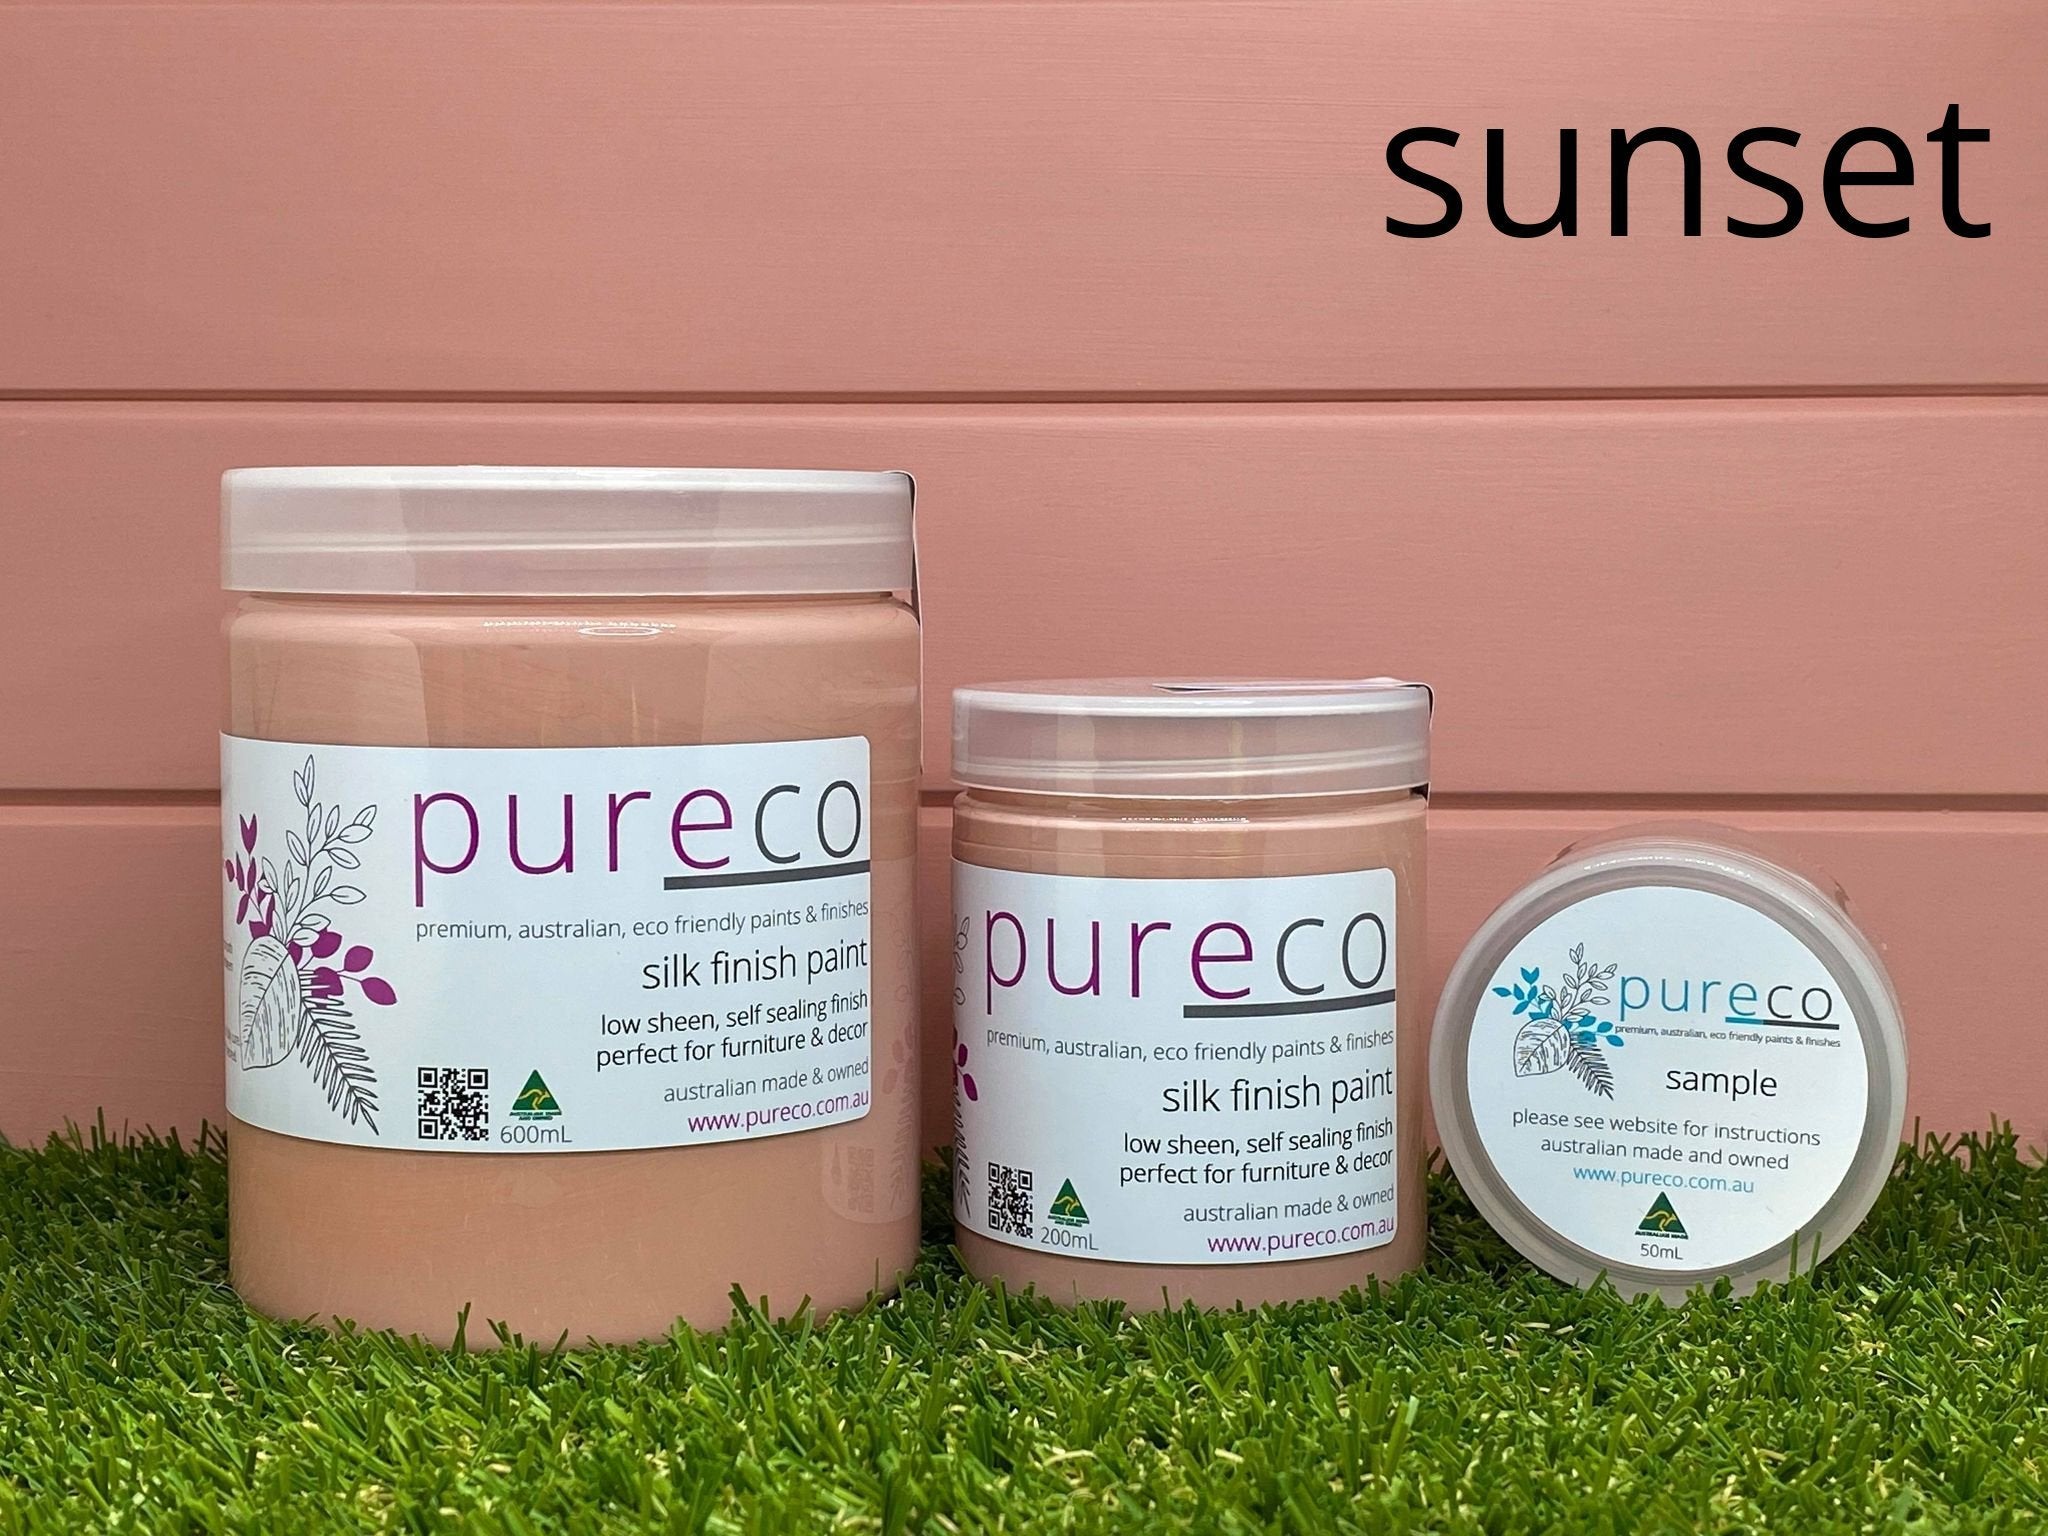 Pureco Silk Finish paint called sunset a dark apricot orange colour with a soft satin sheen.